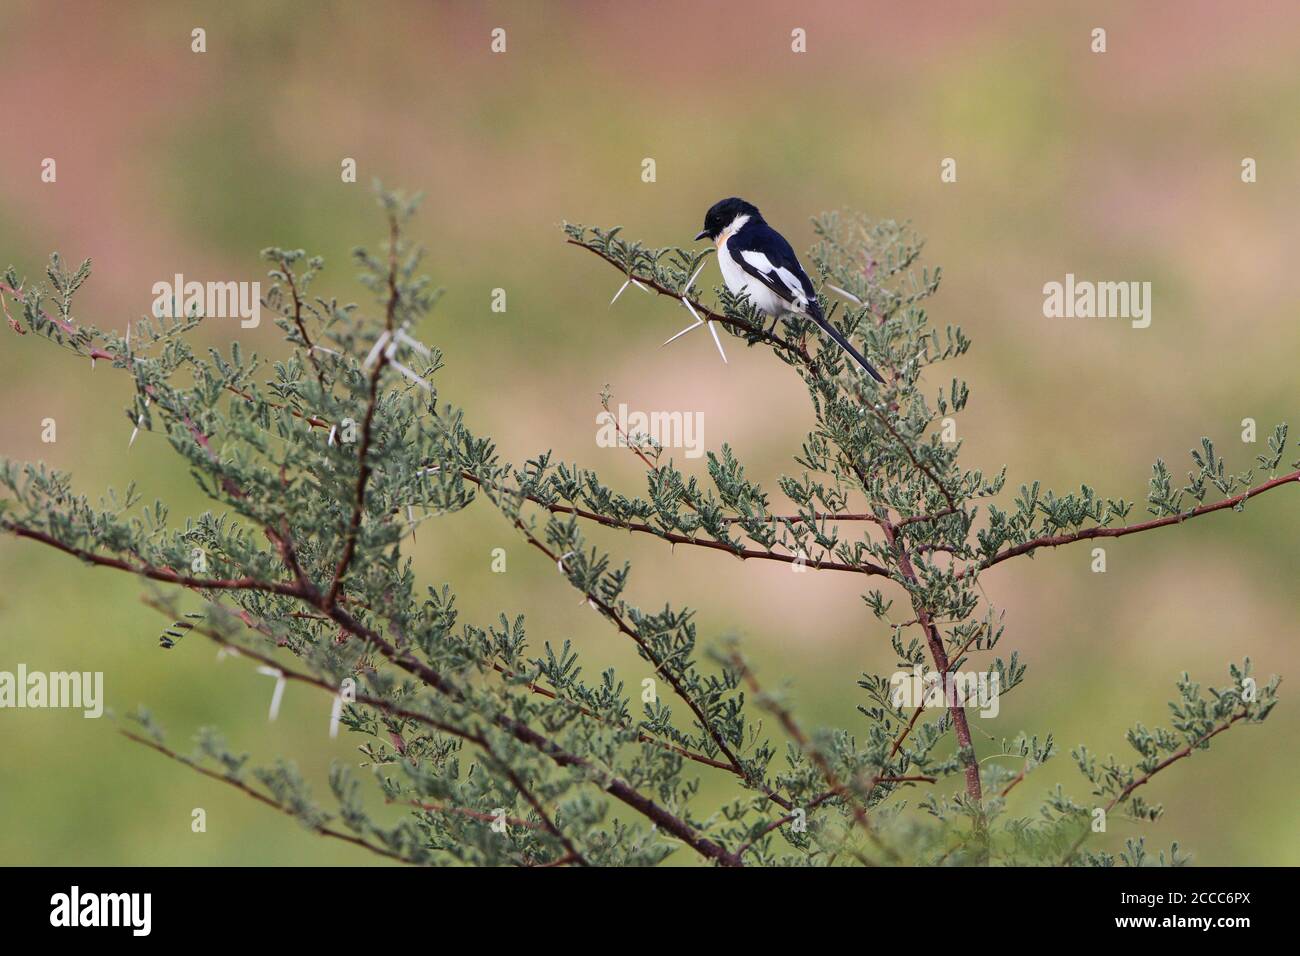 Adult White-bellied Minivet (Pericrocotus erythropygius) perched on top of a bush in India. A species found mainly in dry deciduous forests. Stock Photo